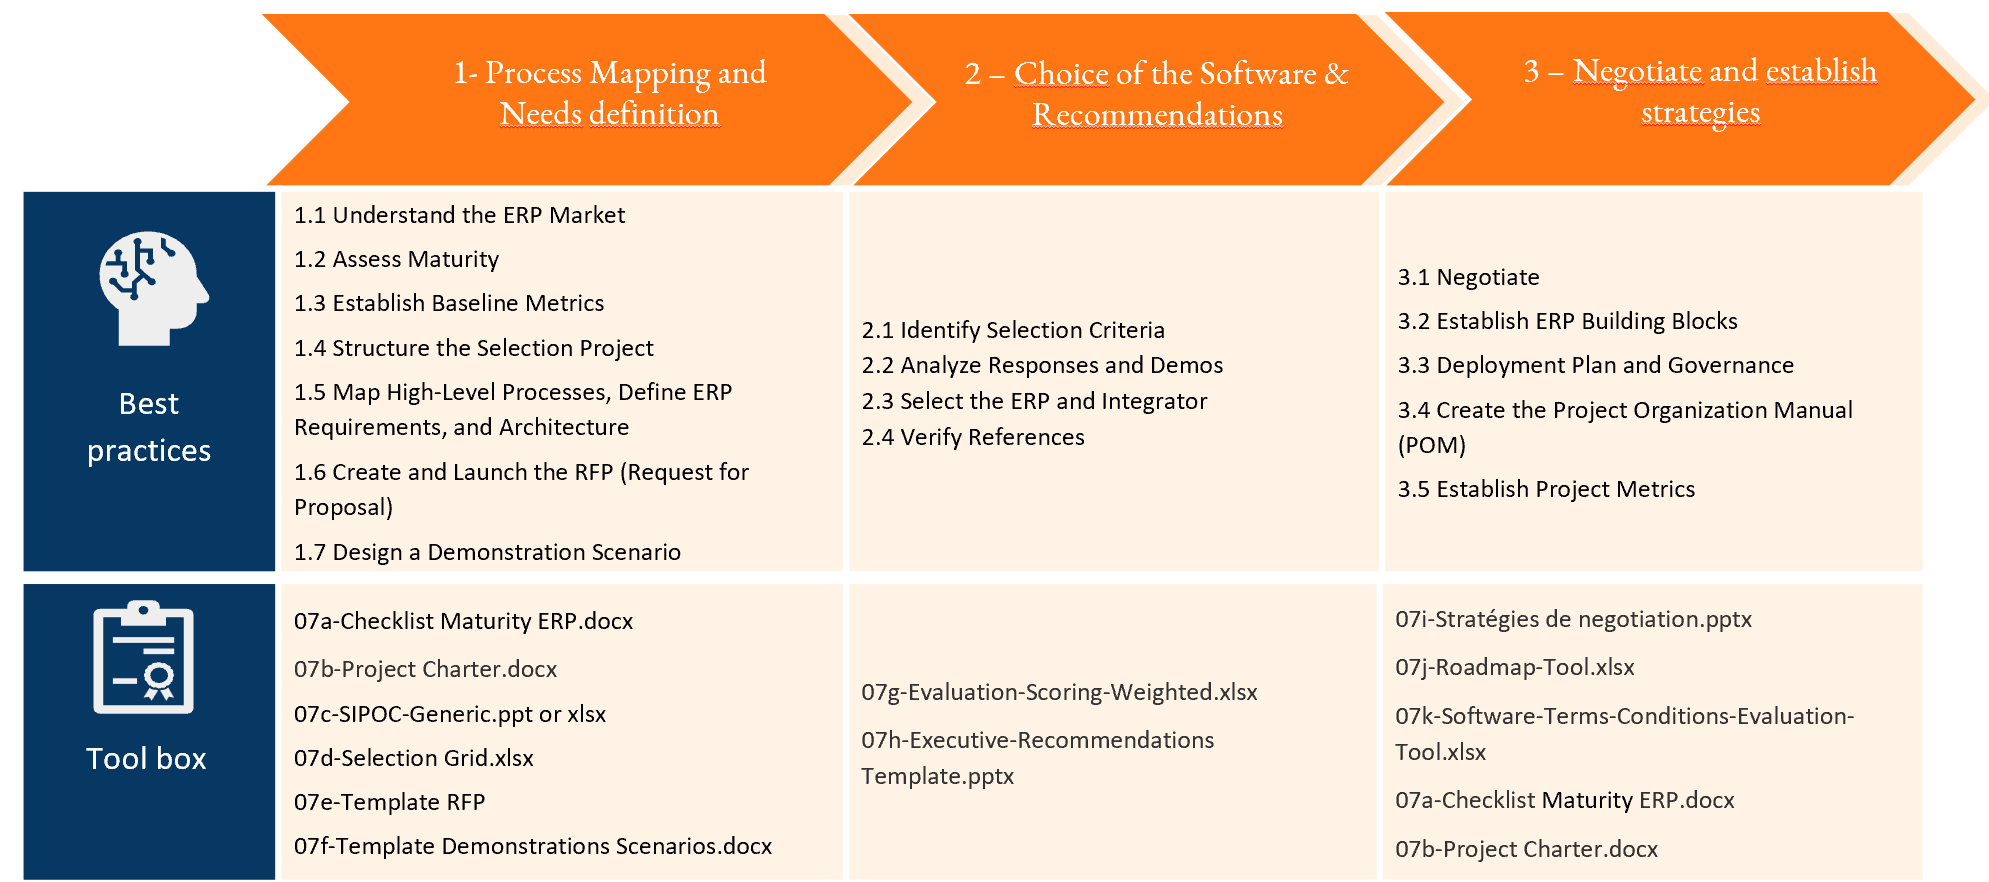 Approach for software selection